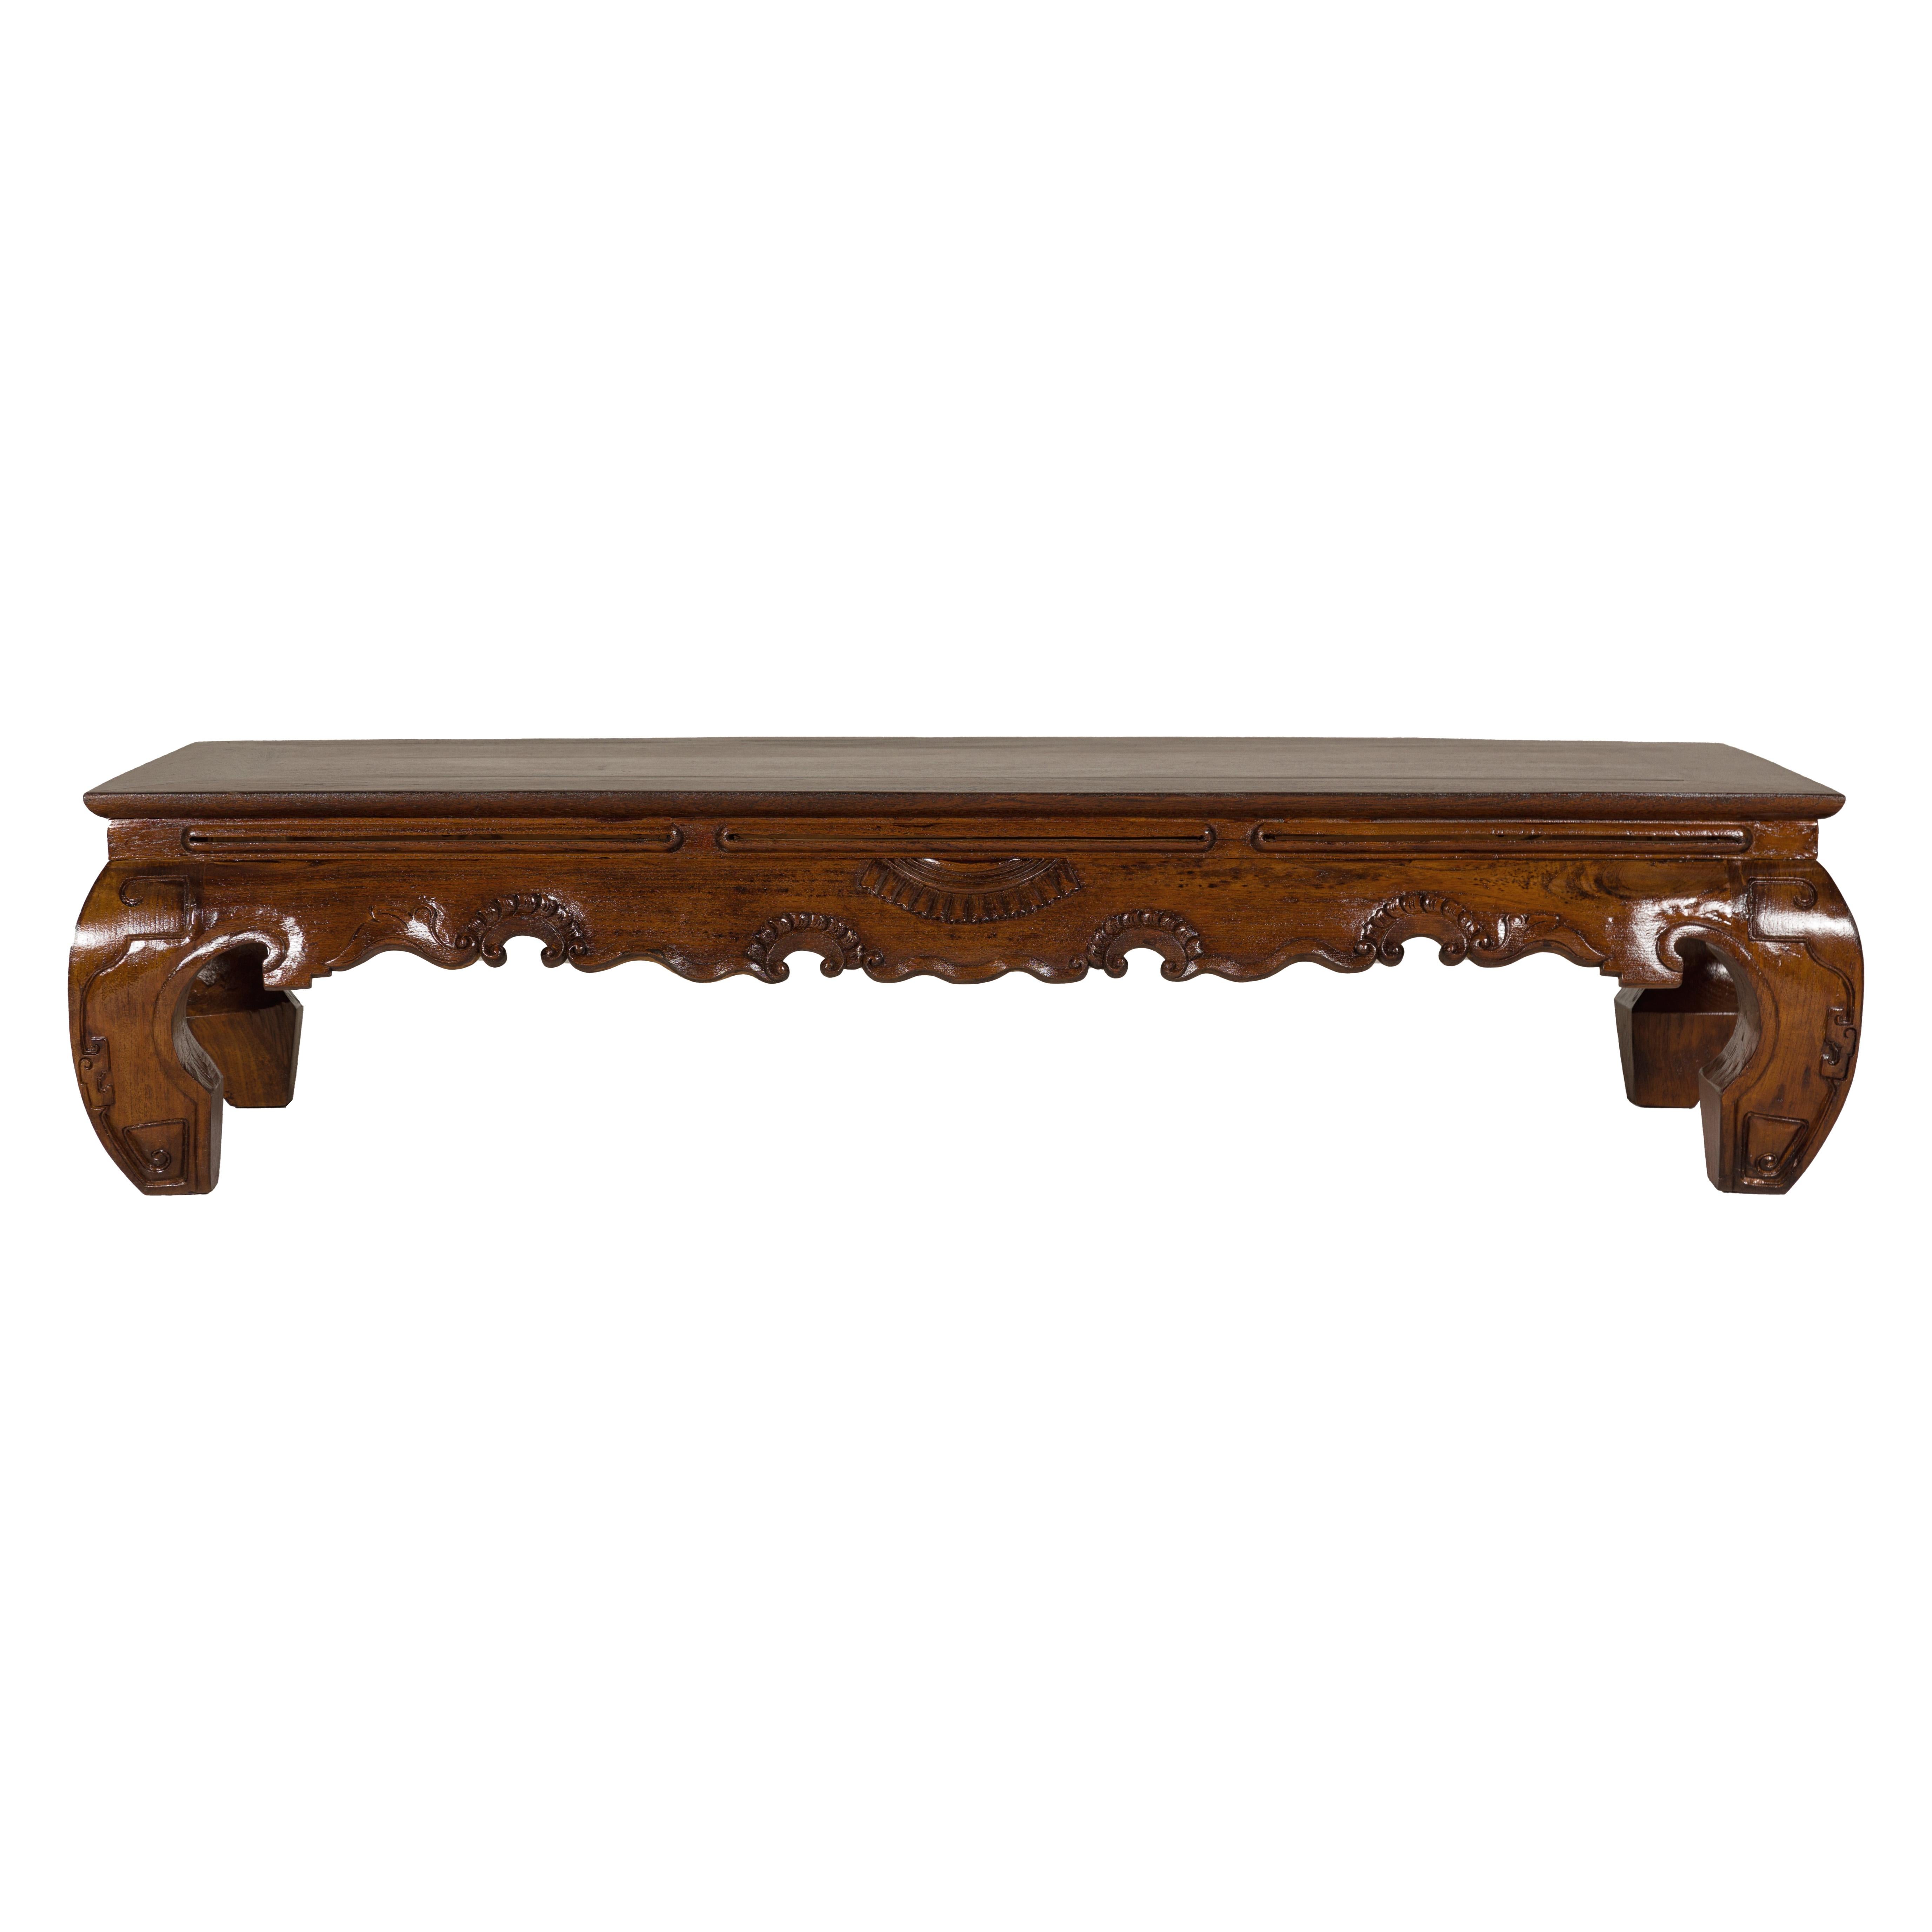 19th Century Lacquered Coffee Table with Hand-Carved Apron and Chow Legs For Sale 11